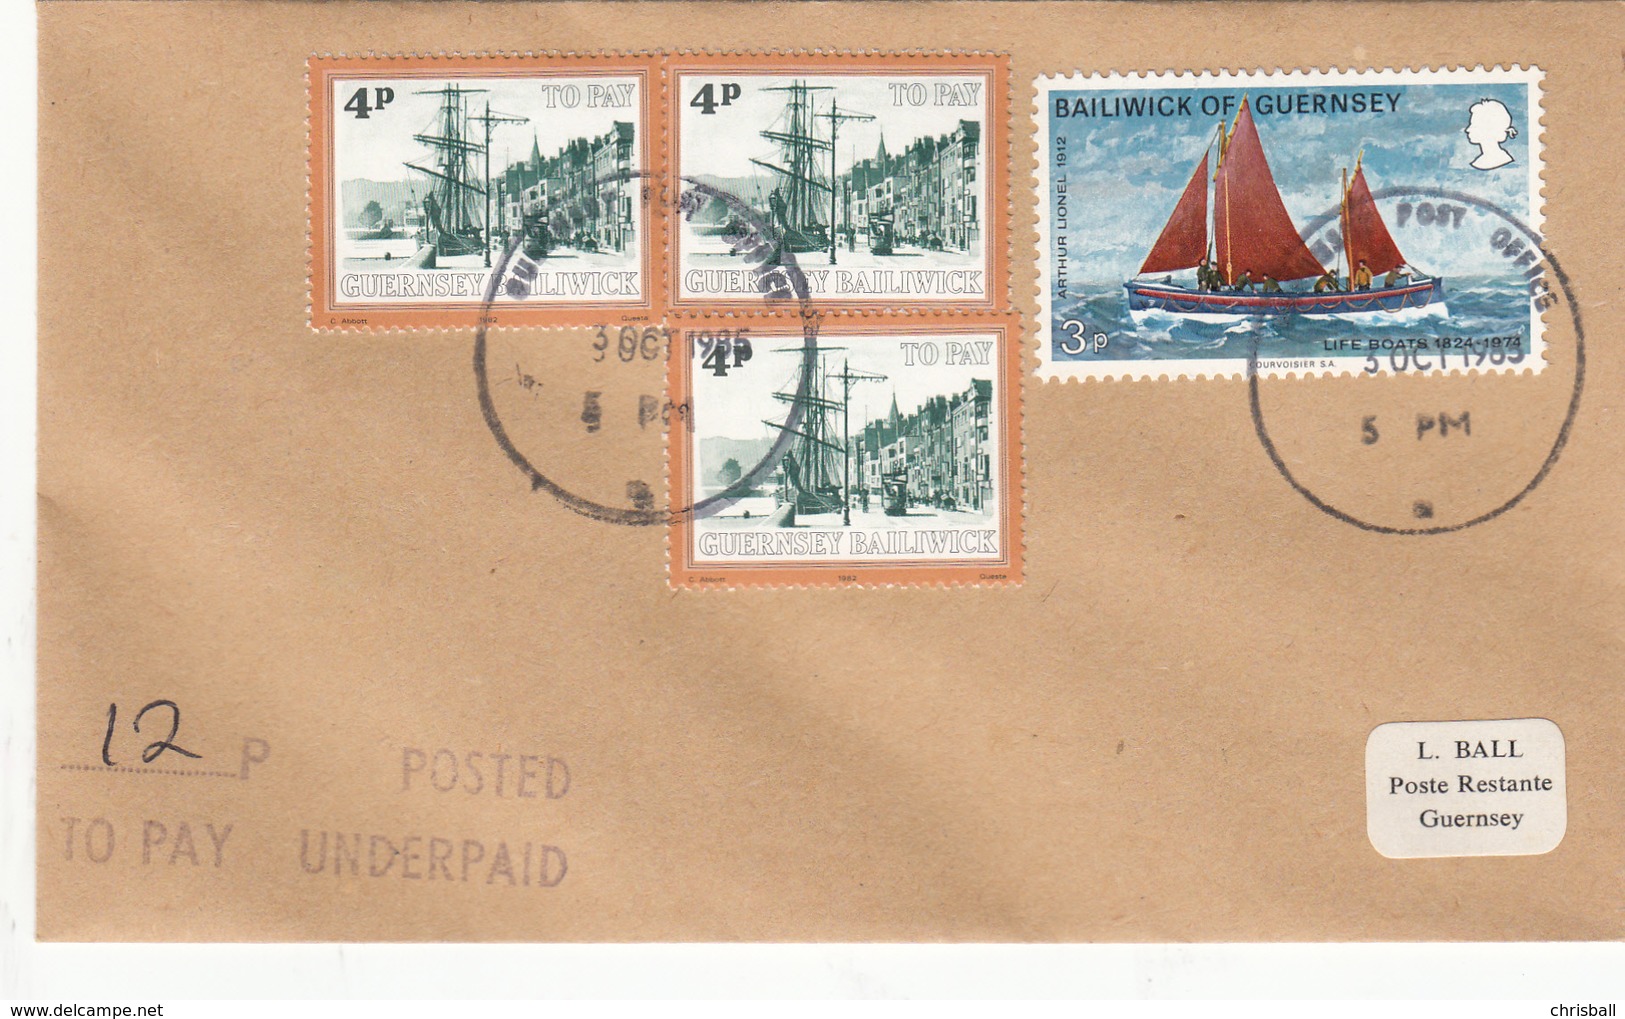 Guernsey 3p RNLI  Used On Local Underpaid Cover With Postage Due 3 X 4p - Guernsey